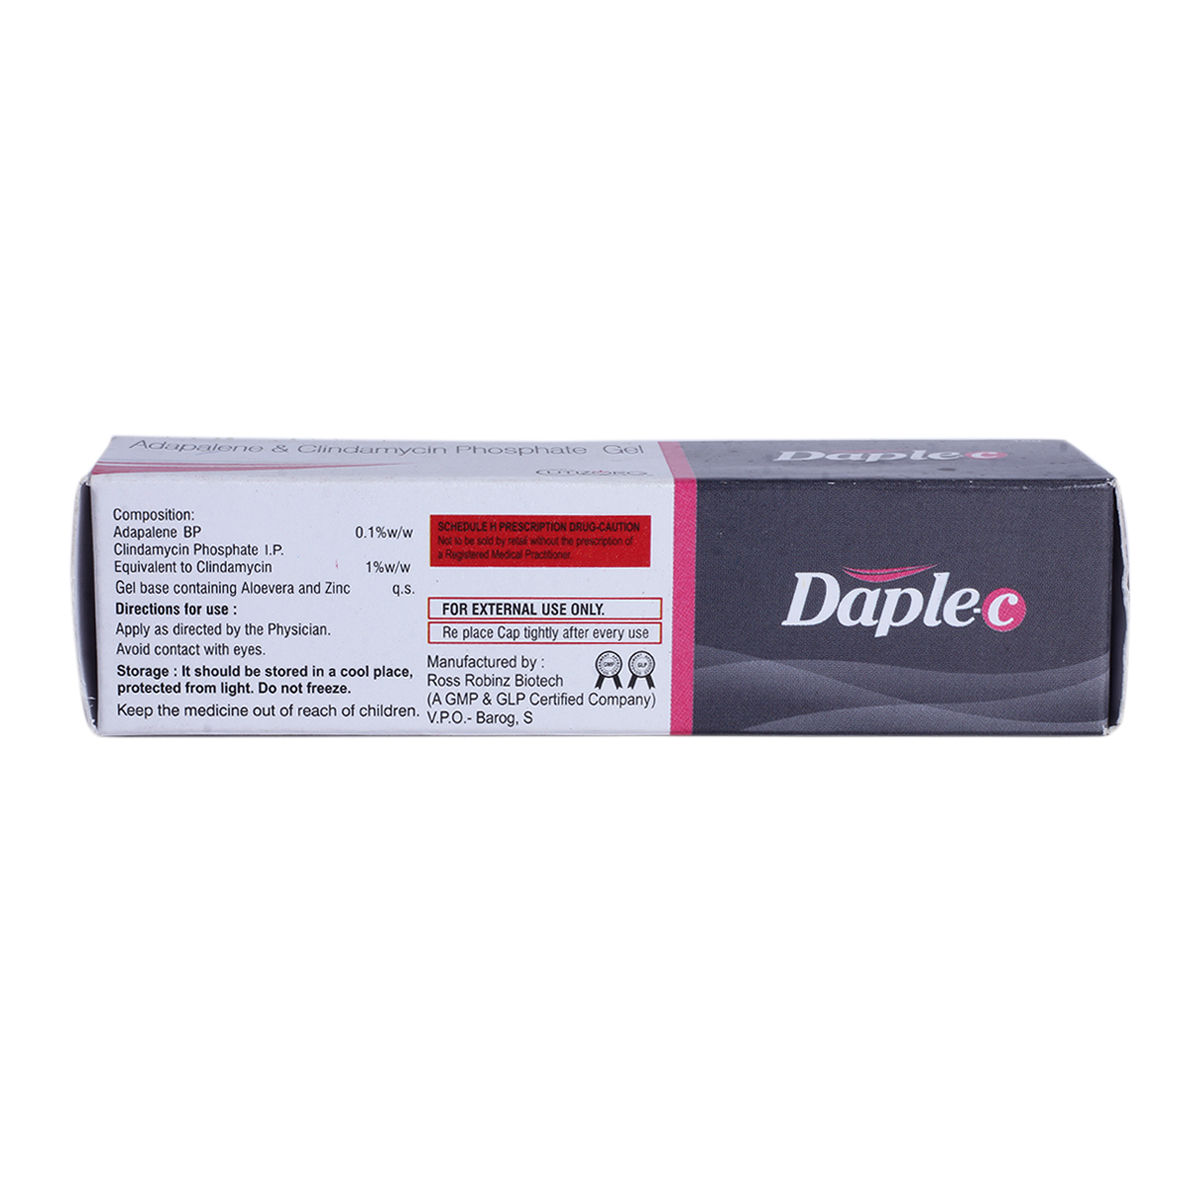 Daple C Gel 15gm, Pack of 1 OINTMENT